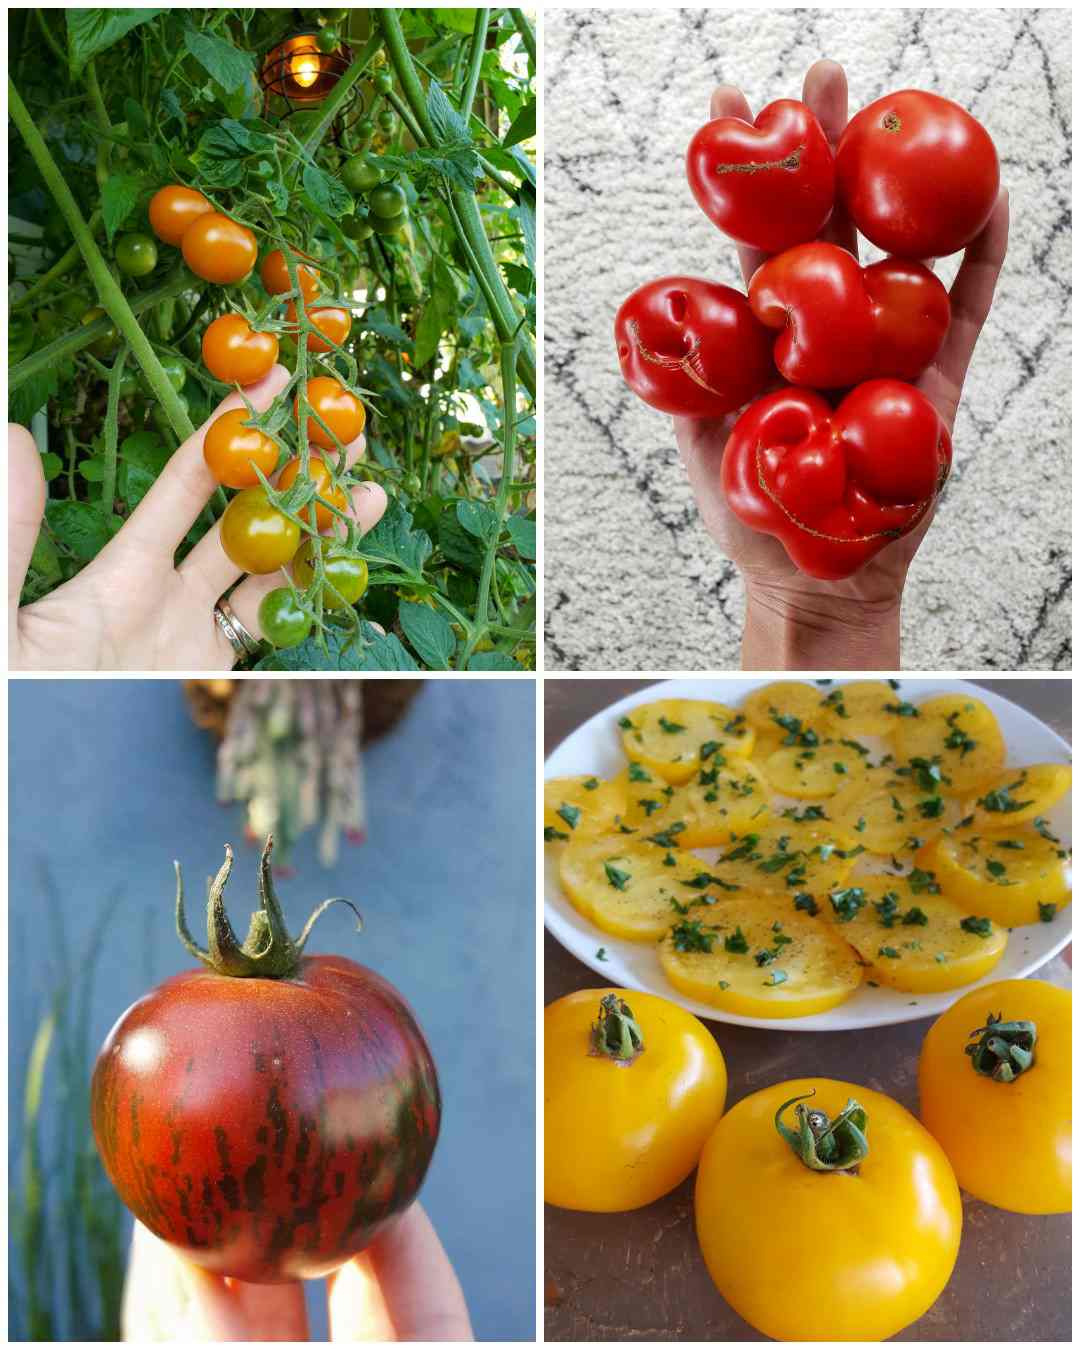 A four part image collage, the first image shows a hand touching a vining bunch of sungold cherry tomatoes, half of the tomatoes on the vine are some variation of orange while the bottom two fruits are still green. The second image shows a hand holding five blood red tomatoes of varying shape and size. They are the same variety of tomato yet there is a bit of differentiation in the fruit. The third image shows a hand holding one tomato that is dark blood red in color with dark green to brown striations. The sun is shining which illuminates the fruit even more. The fourth image shows a white ceramic plate full of slice yellow tomatoes, they are garnished with chopped basil. There are three whole yellow tomatoes sitting directly in front of the plate.